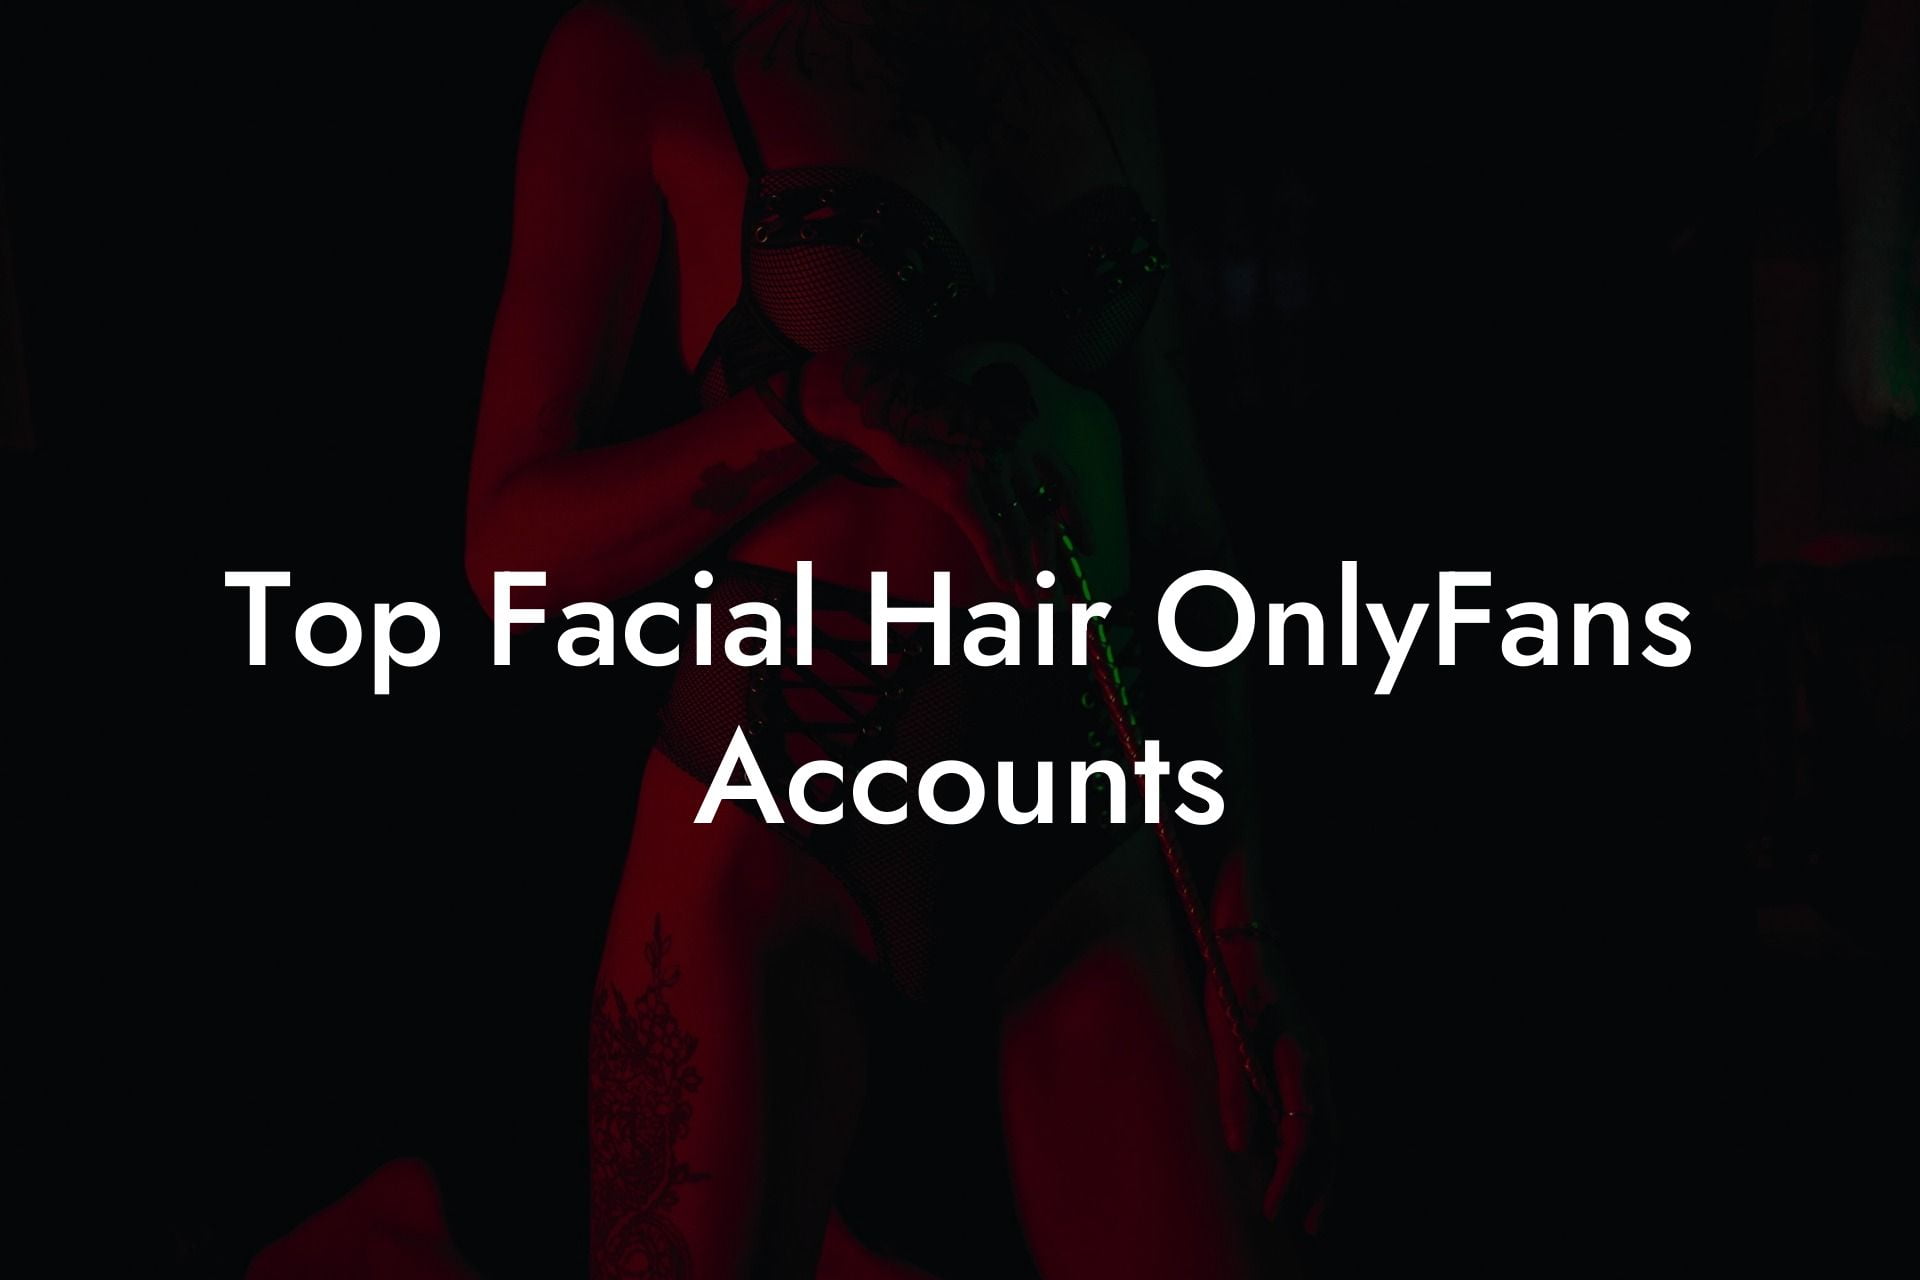 Top Facial Hair OnlyFans Accounts